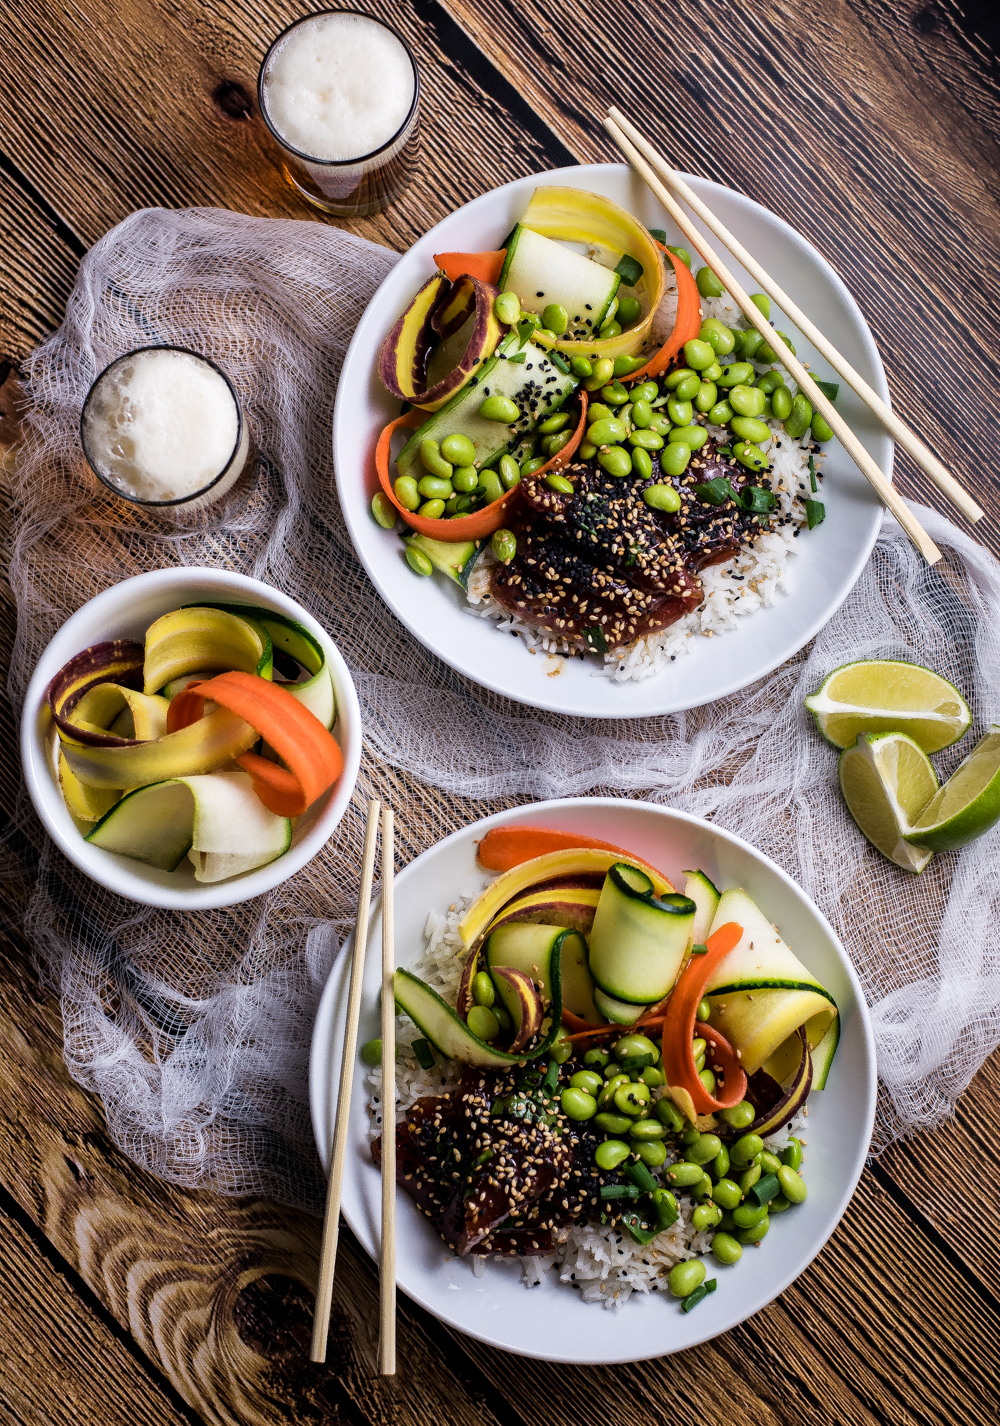 Ahi Poke Bowls with Sesame Ginger Vinaigrette are a nutritious and delicious way to spruce up your weeknight dinner recipes!